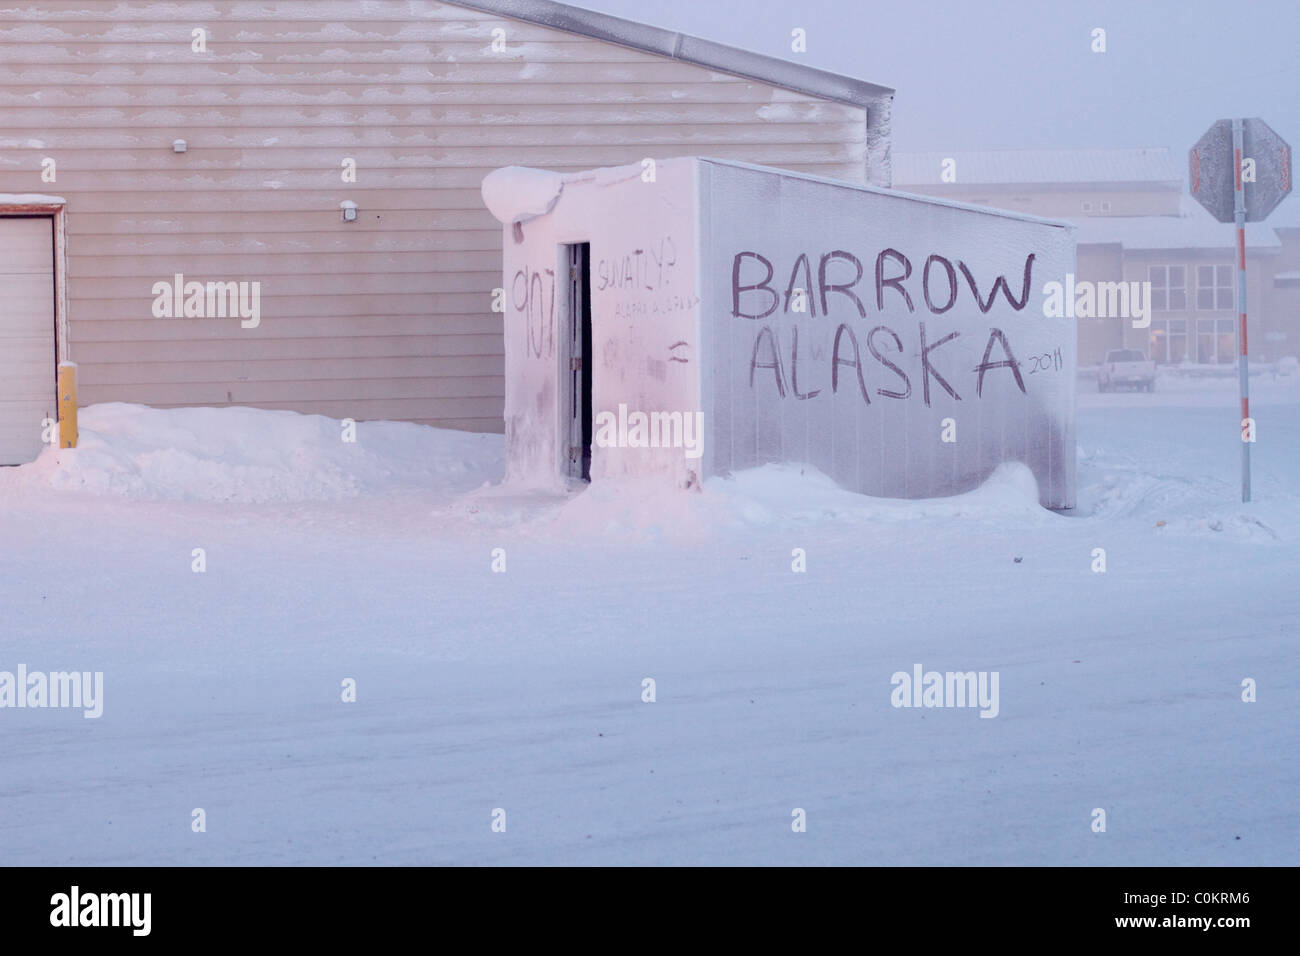 Barrow Alaska written in the snow and ice on a small shed just outside the hospital in Barrow, AK USA. Stock Photo